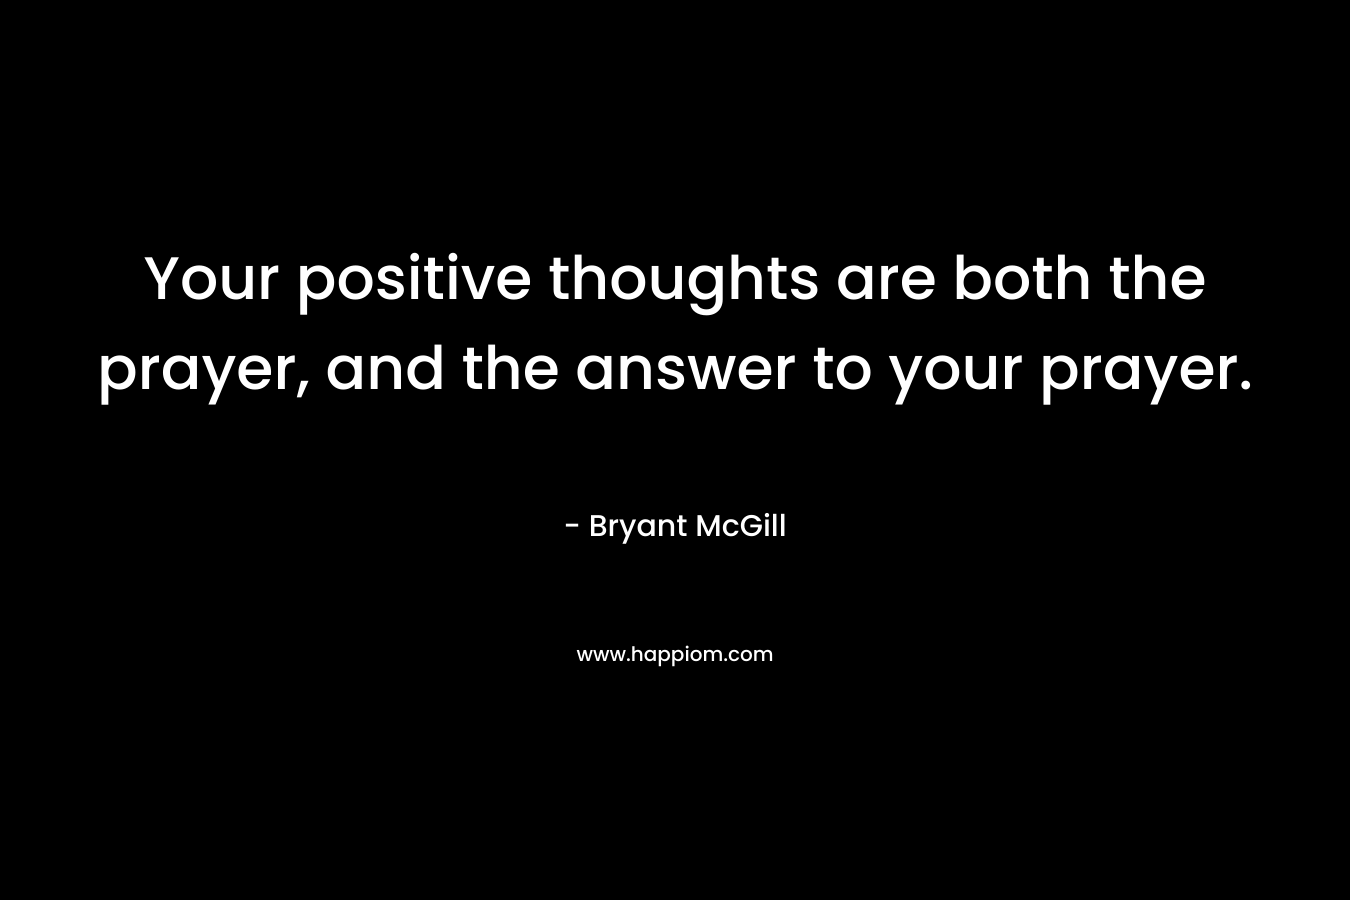 Your positive thoughts are both the prayer, and the answer to your prayer.